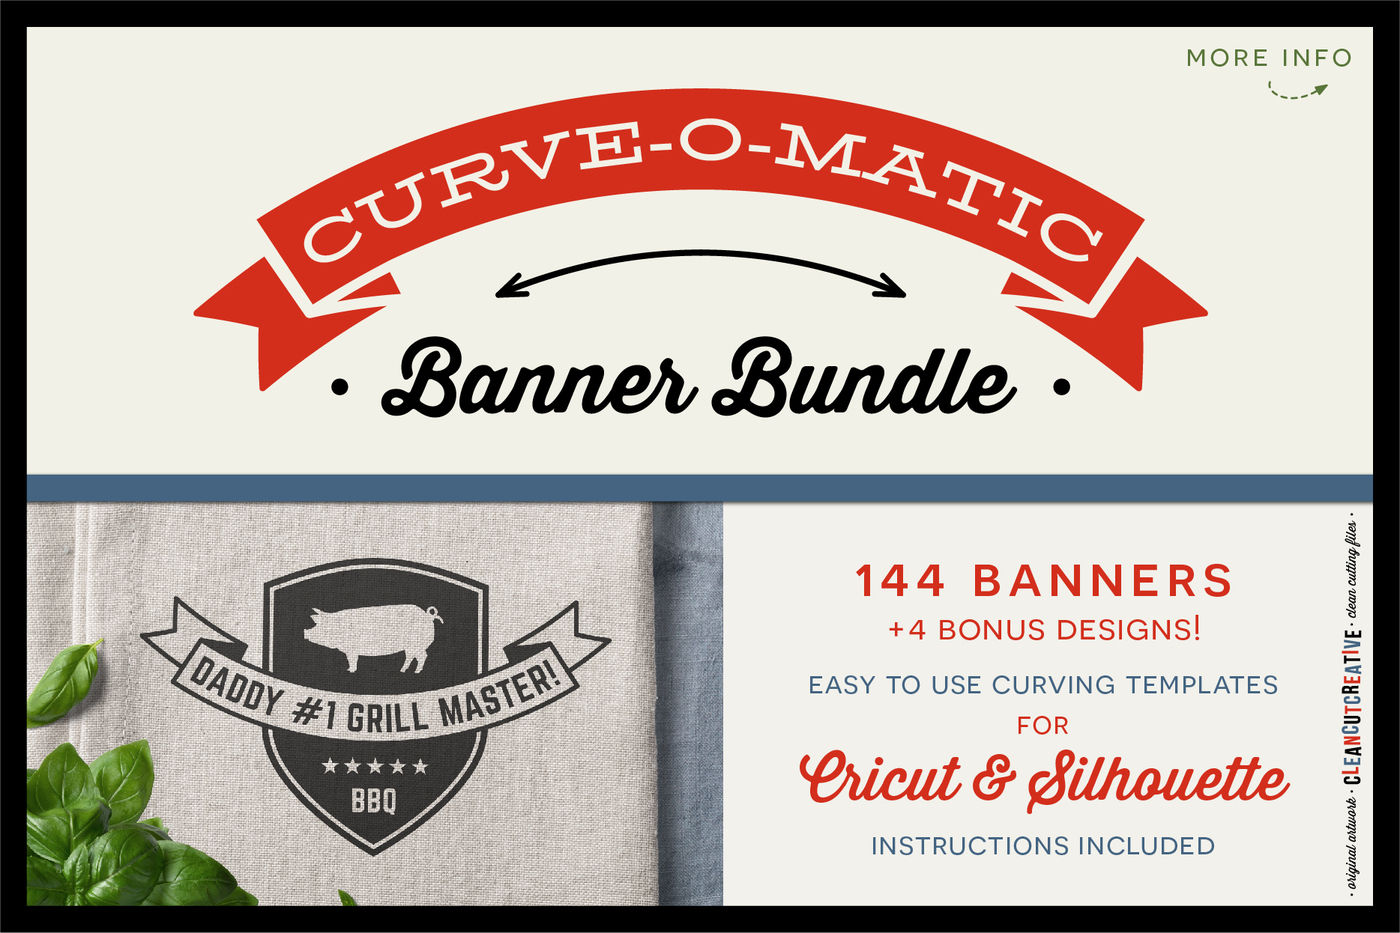 ori 3458725 afbfaf271800bd5db8b15b3e99d107ab1d1d767b curve o matic banner bundle curved text banner toolkit